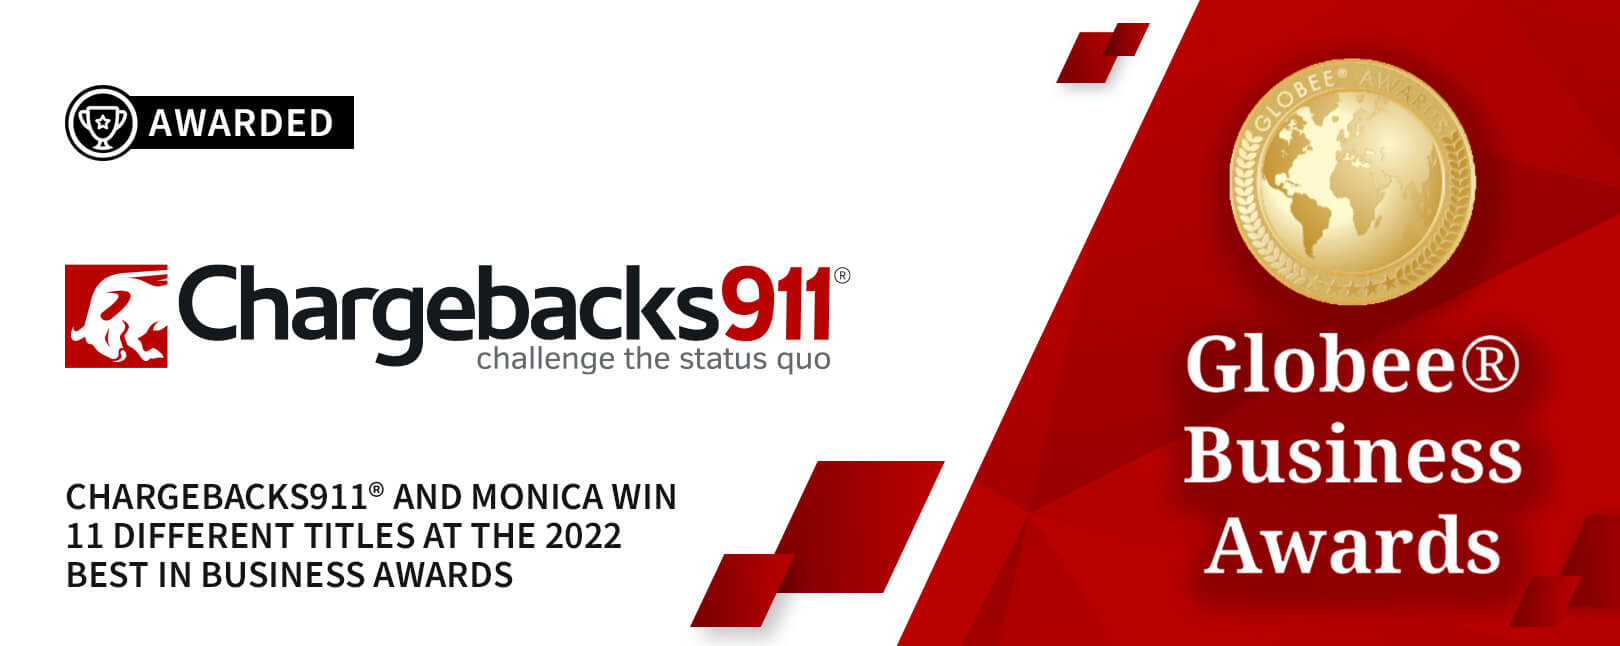 Chargebacks911® Win 11 Titles at the 2022 ‘Best in Business’ Awards!